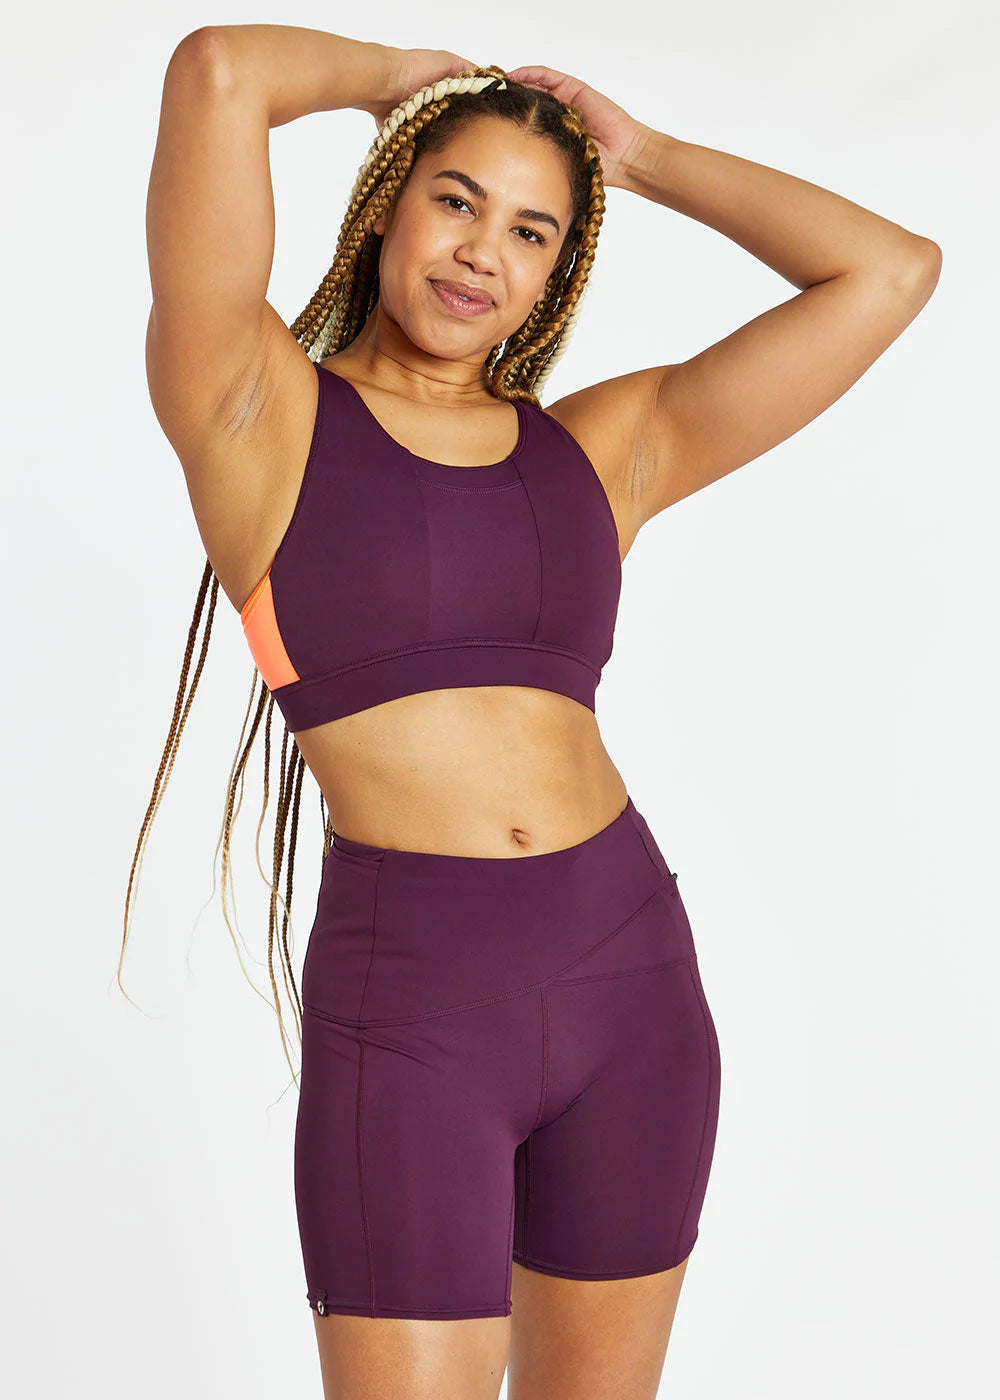 She has something to SMILE 😊 about! The Oiselle Pockito Bra is